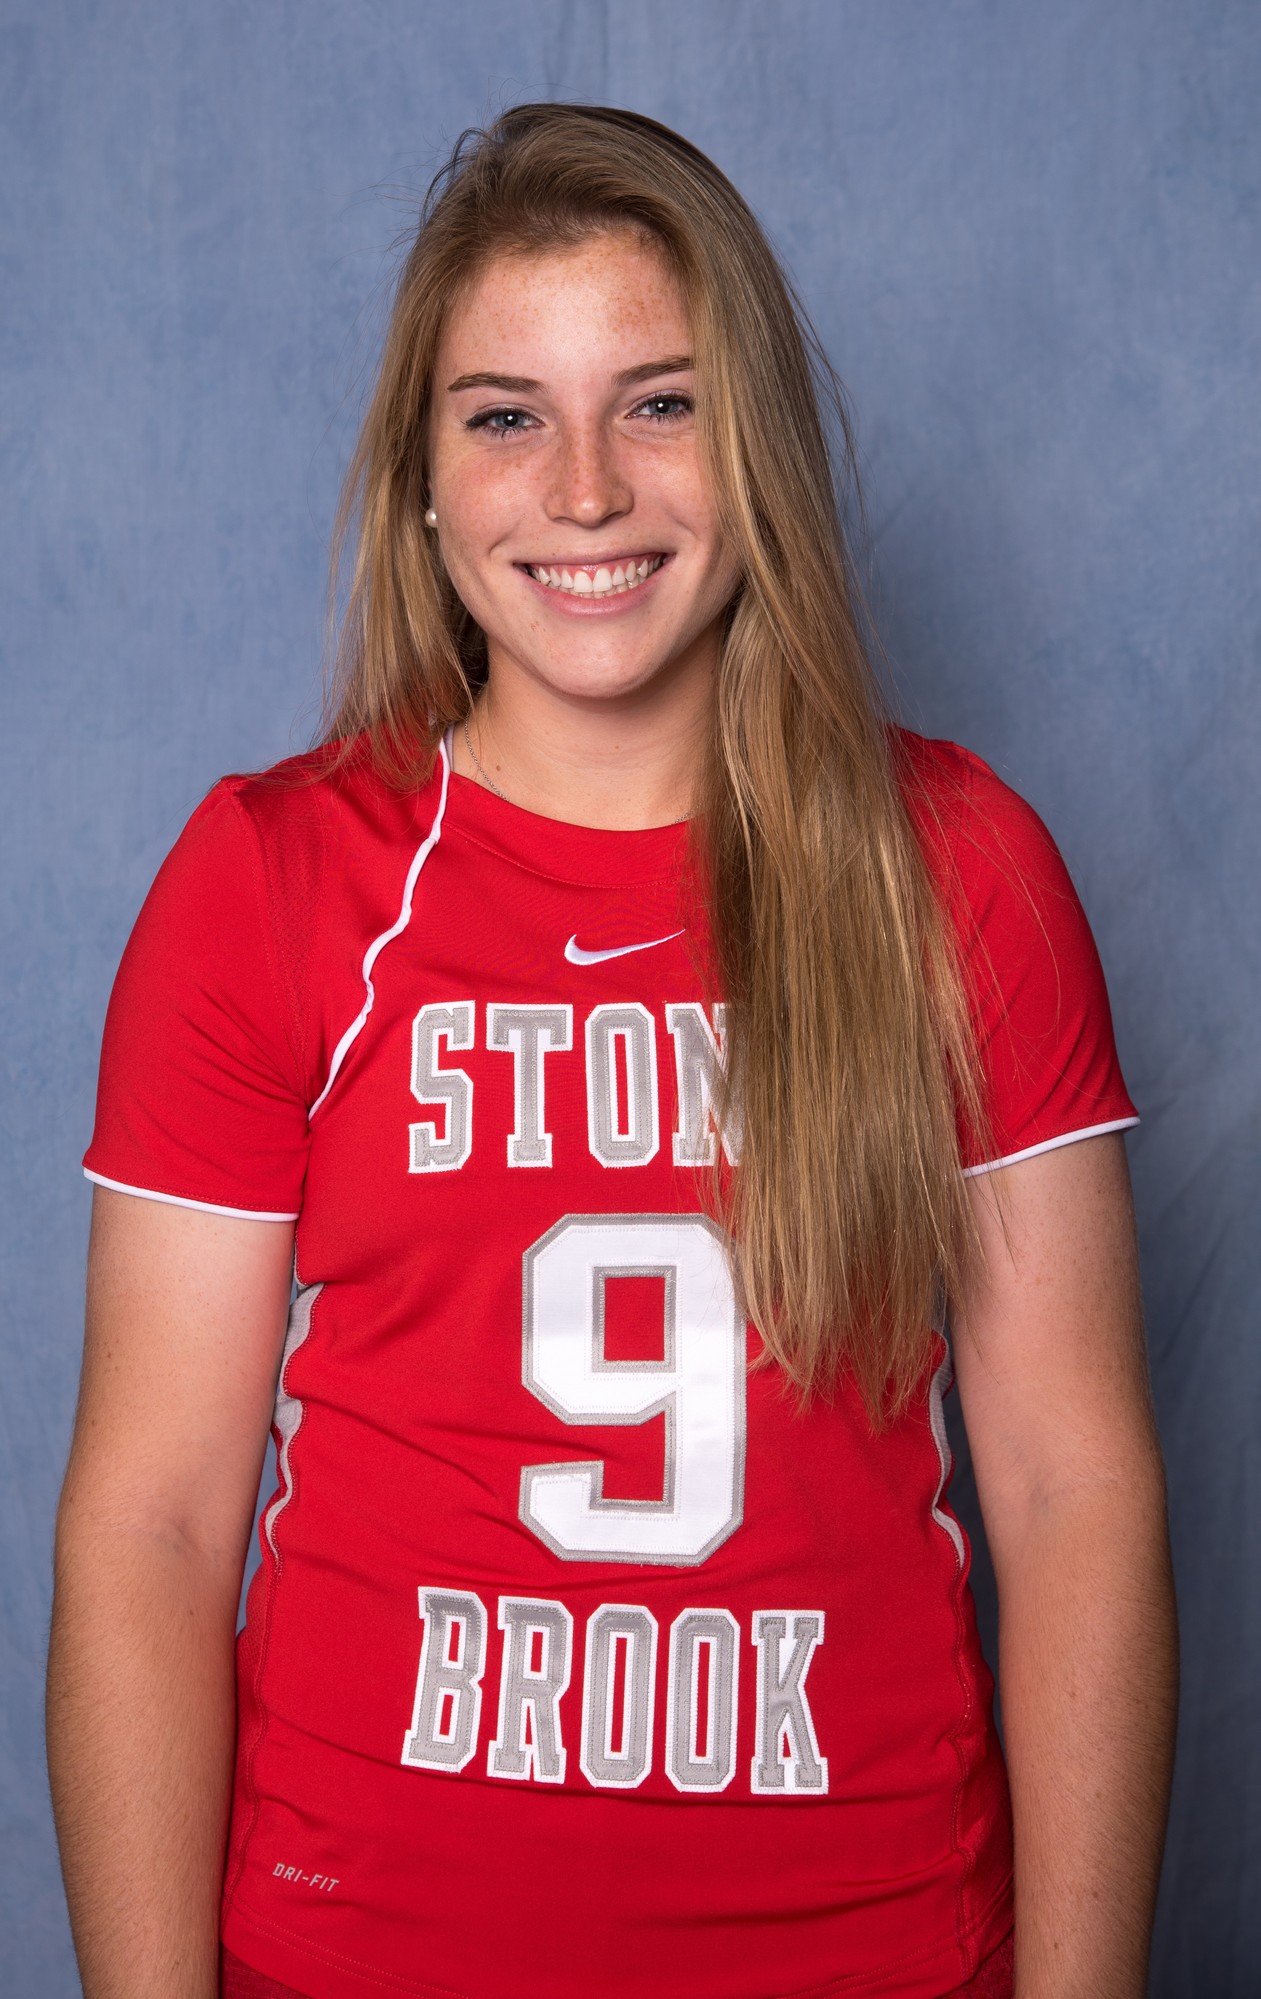 Emma Schait, a 2014 Seaford High School graduate, is playing lacrosse this year for the Stony Brook Seawolves.